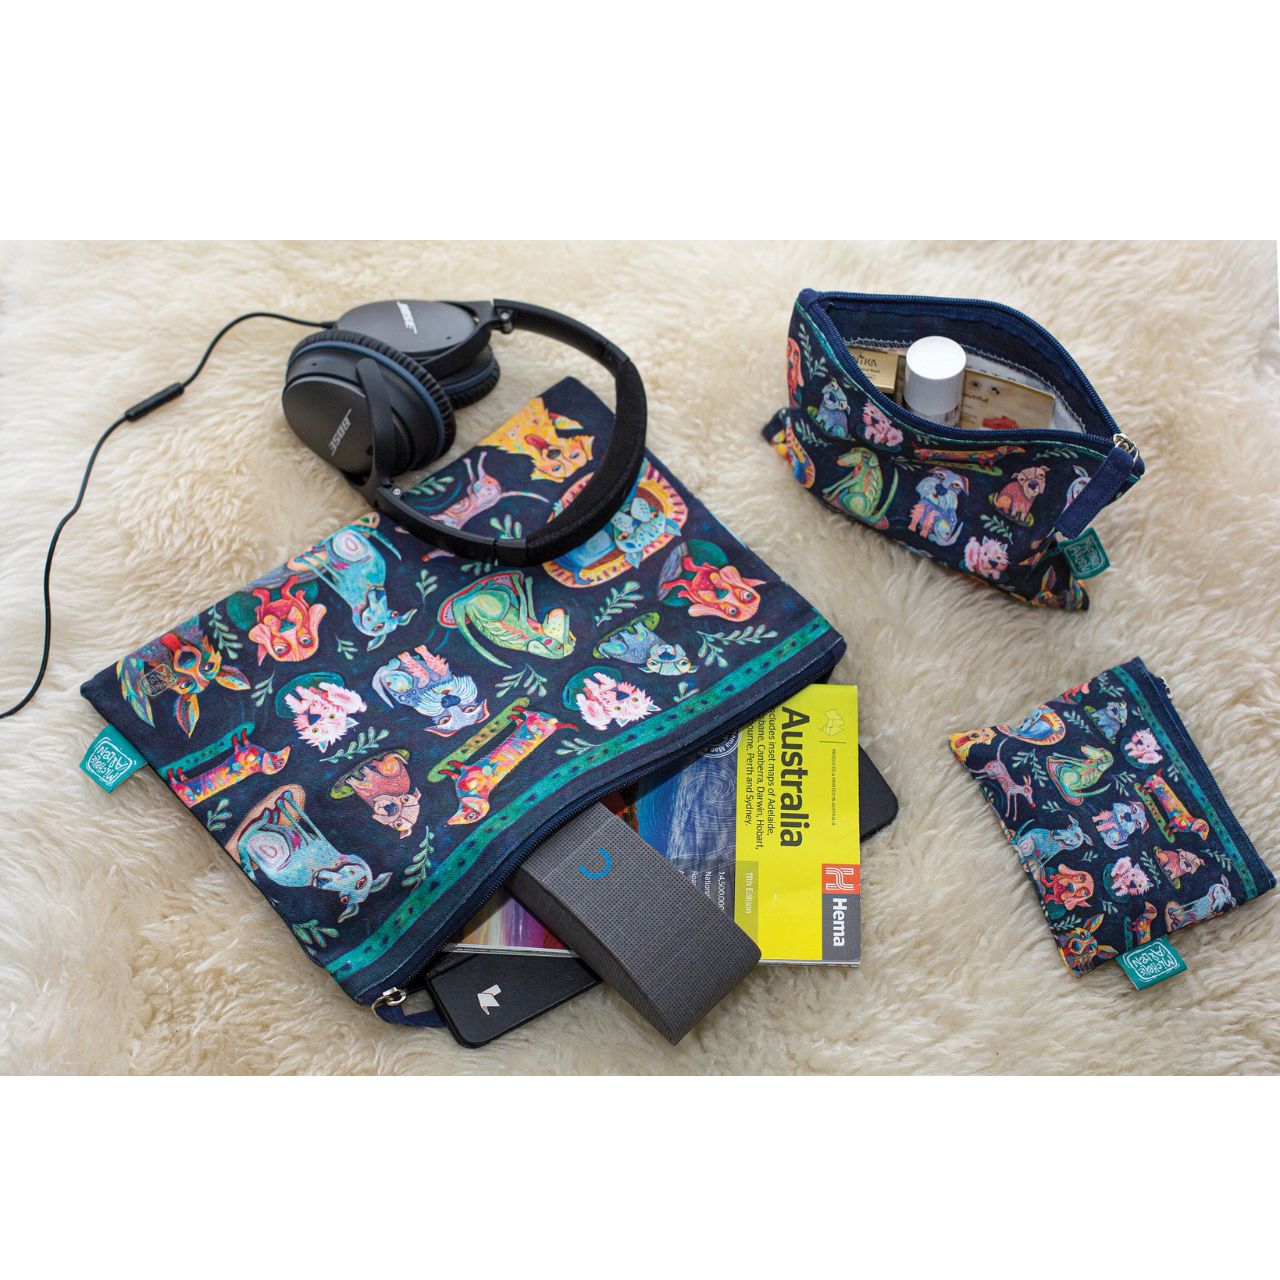 Michelle Allen Dog Park Zipped Pouch Large  These beautiful zippered 100% Cotton pouches are perfect for pencils/pens, trinkets, charging cords, make up or pretty much anything you can possibly think of. Exclusively designed by Michelle Allen.